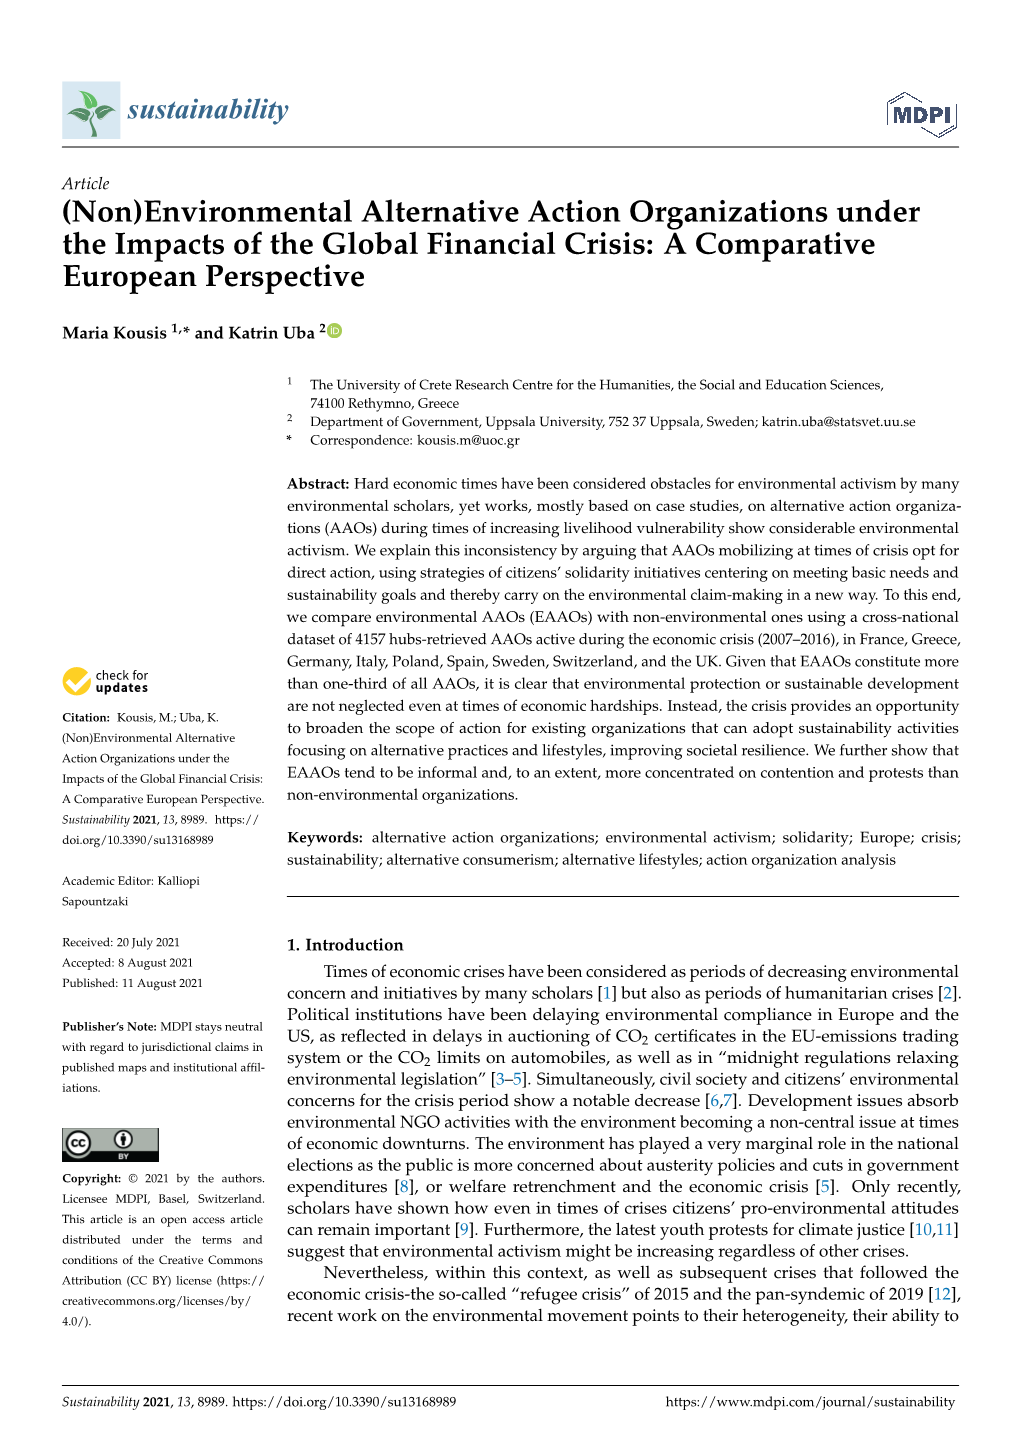 Environmental Alternative Action Organizations Under the Impacts of the Global Financial Crisis: a Comparative European Perspective